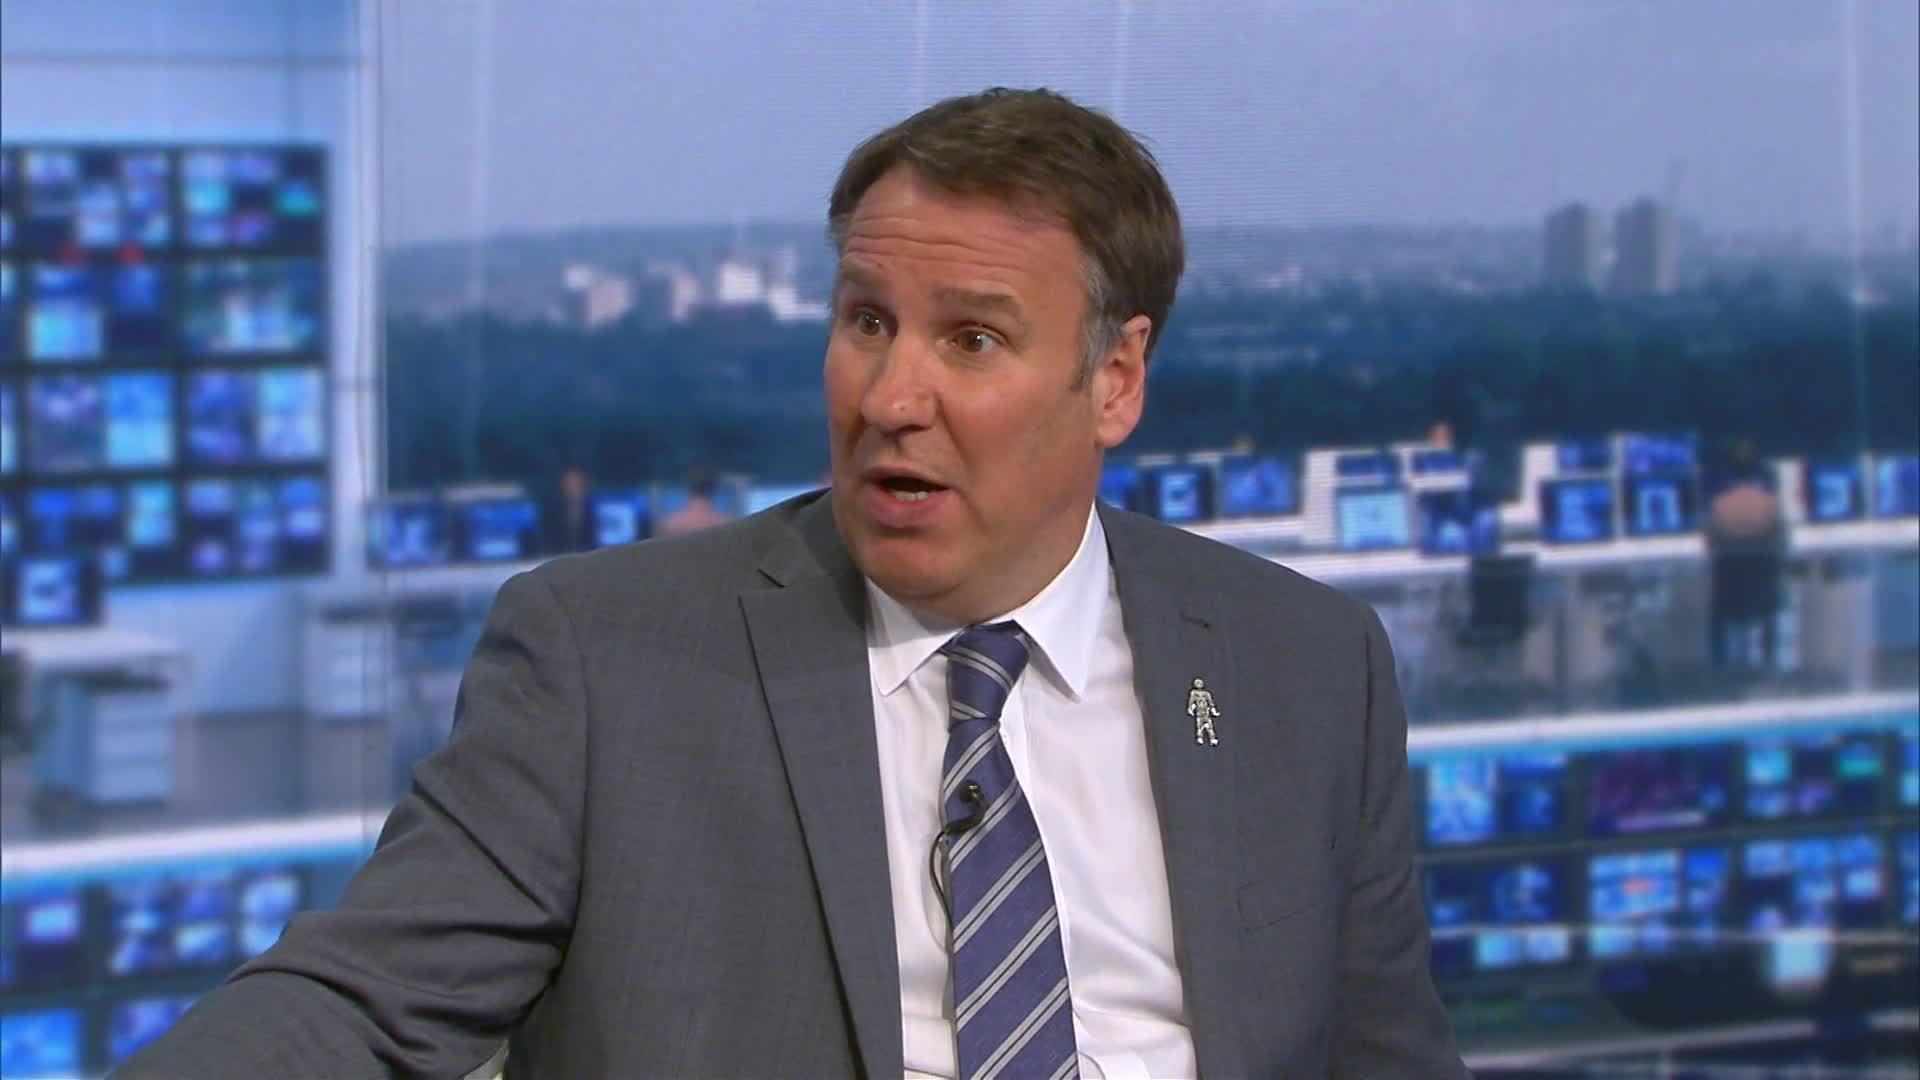 Paul Merson is legend at Arsenal.